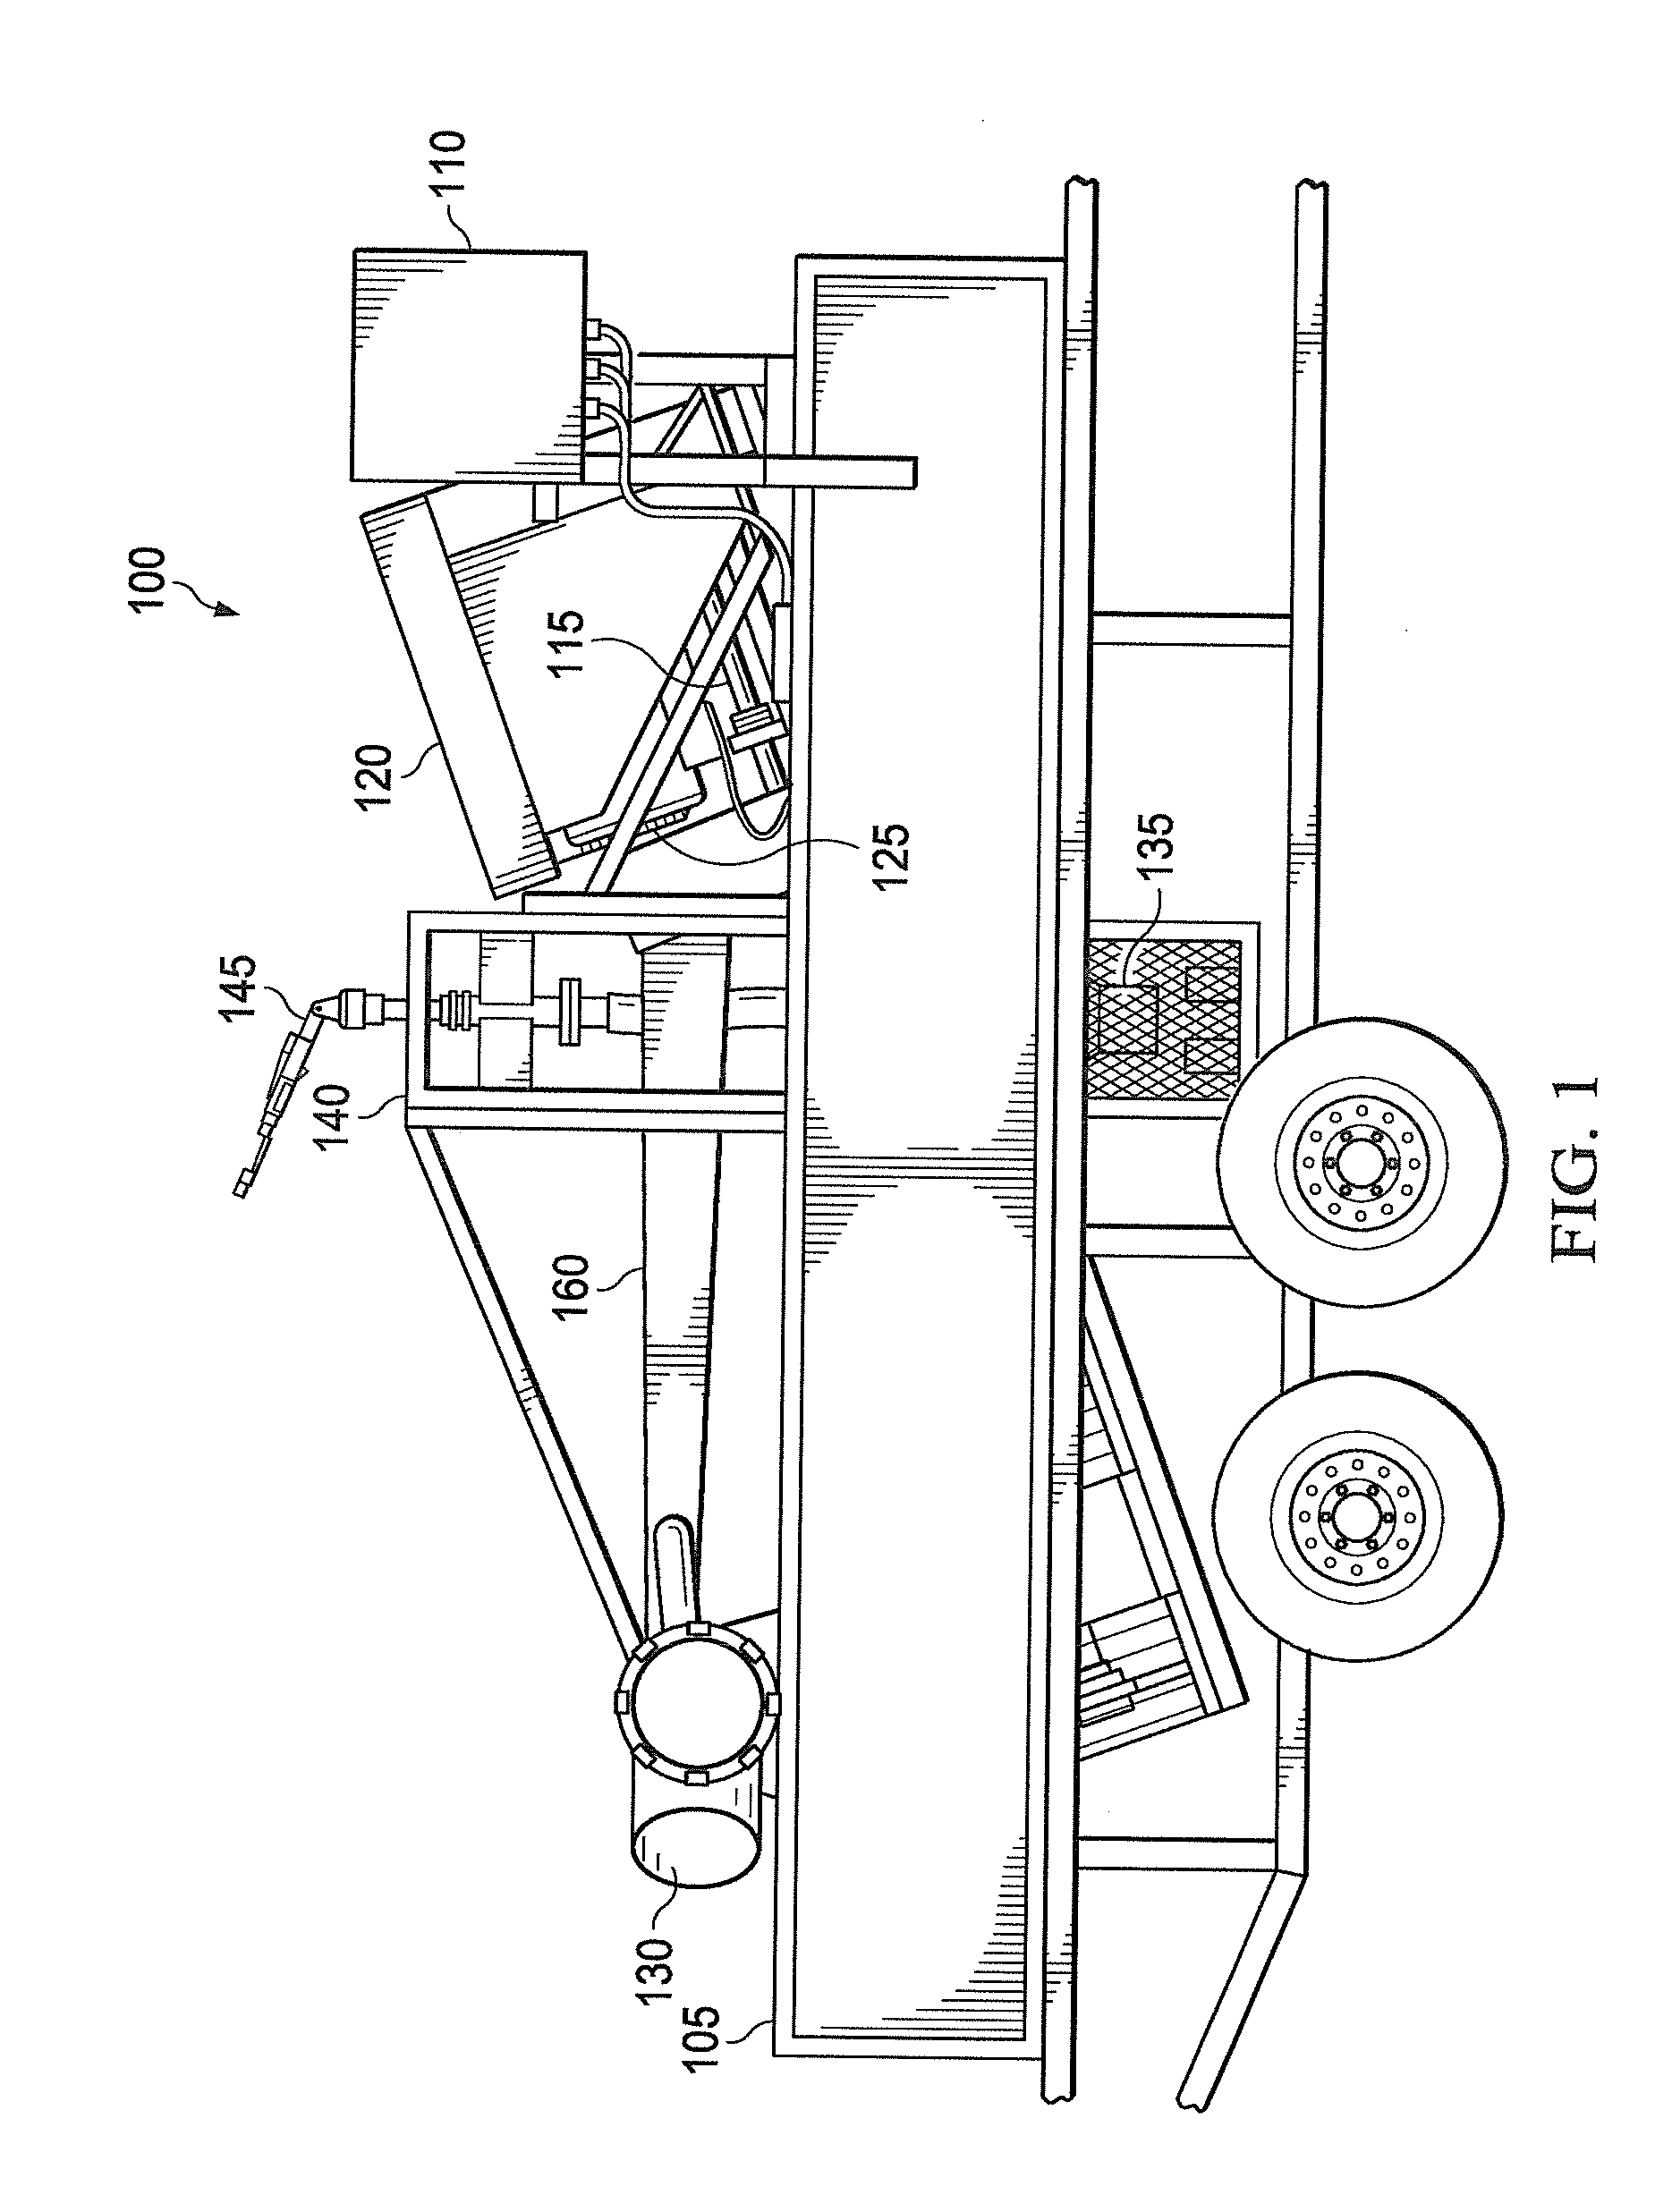 System and method for aeration